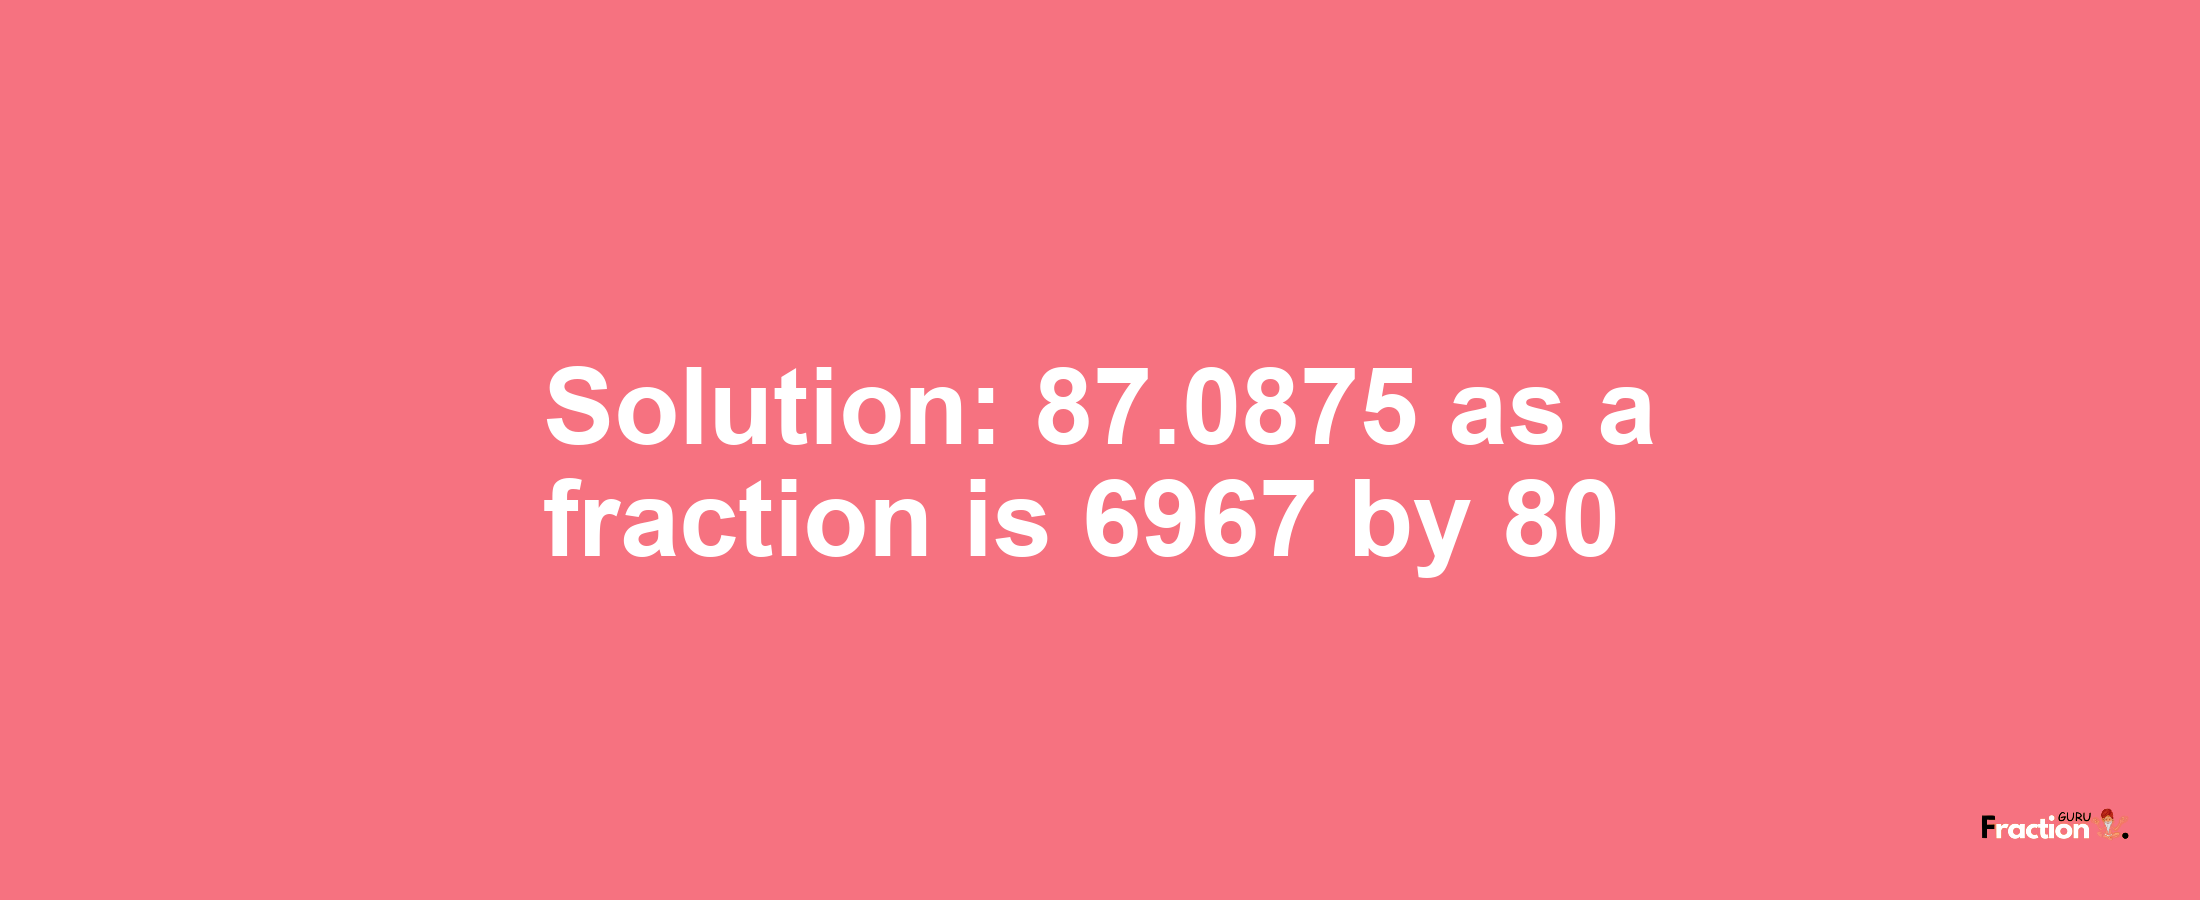 Solution:87.0875 as a fraction is 6967/80